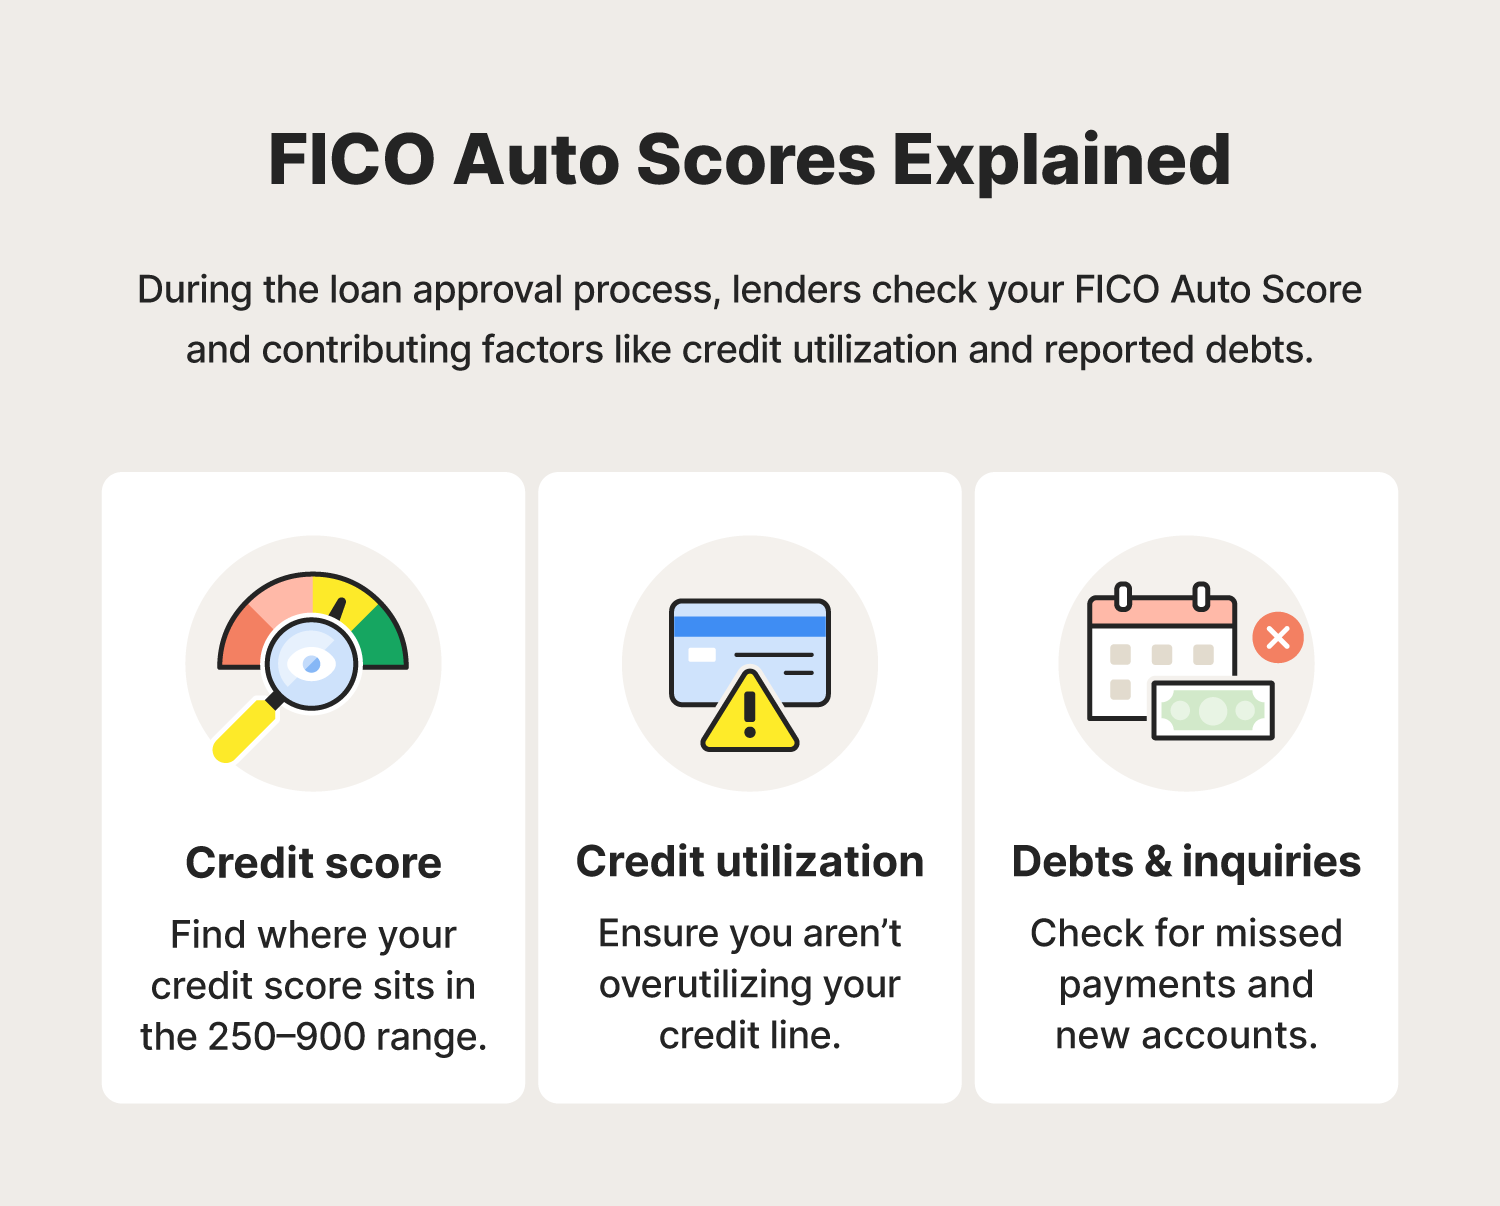 An illustration showing the primary components factored into the FICO Auto Score.